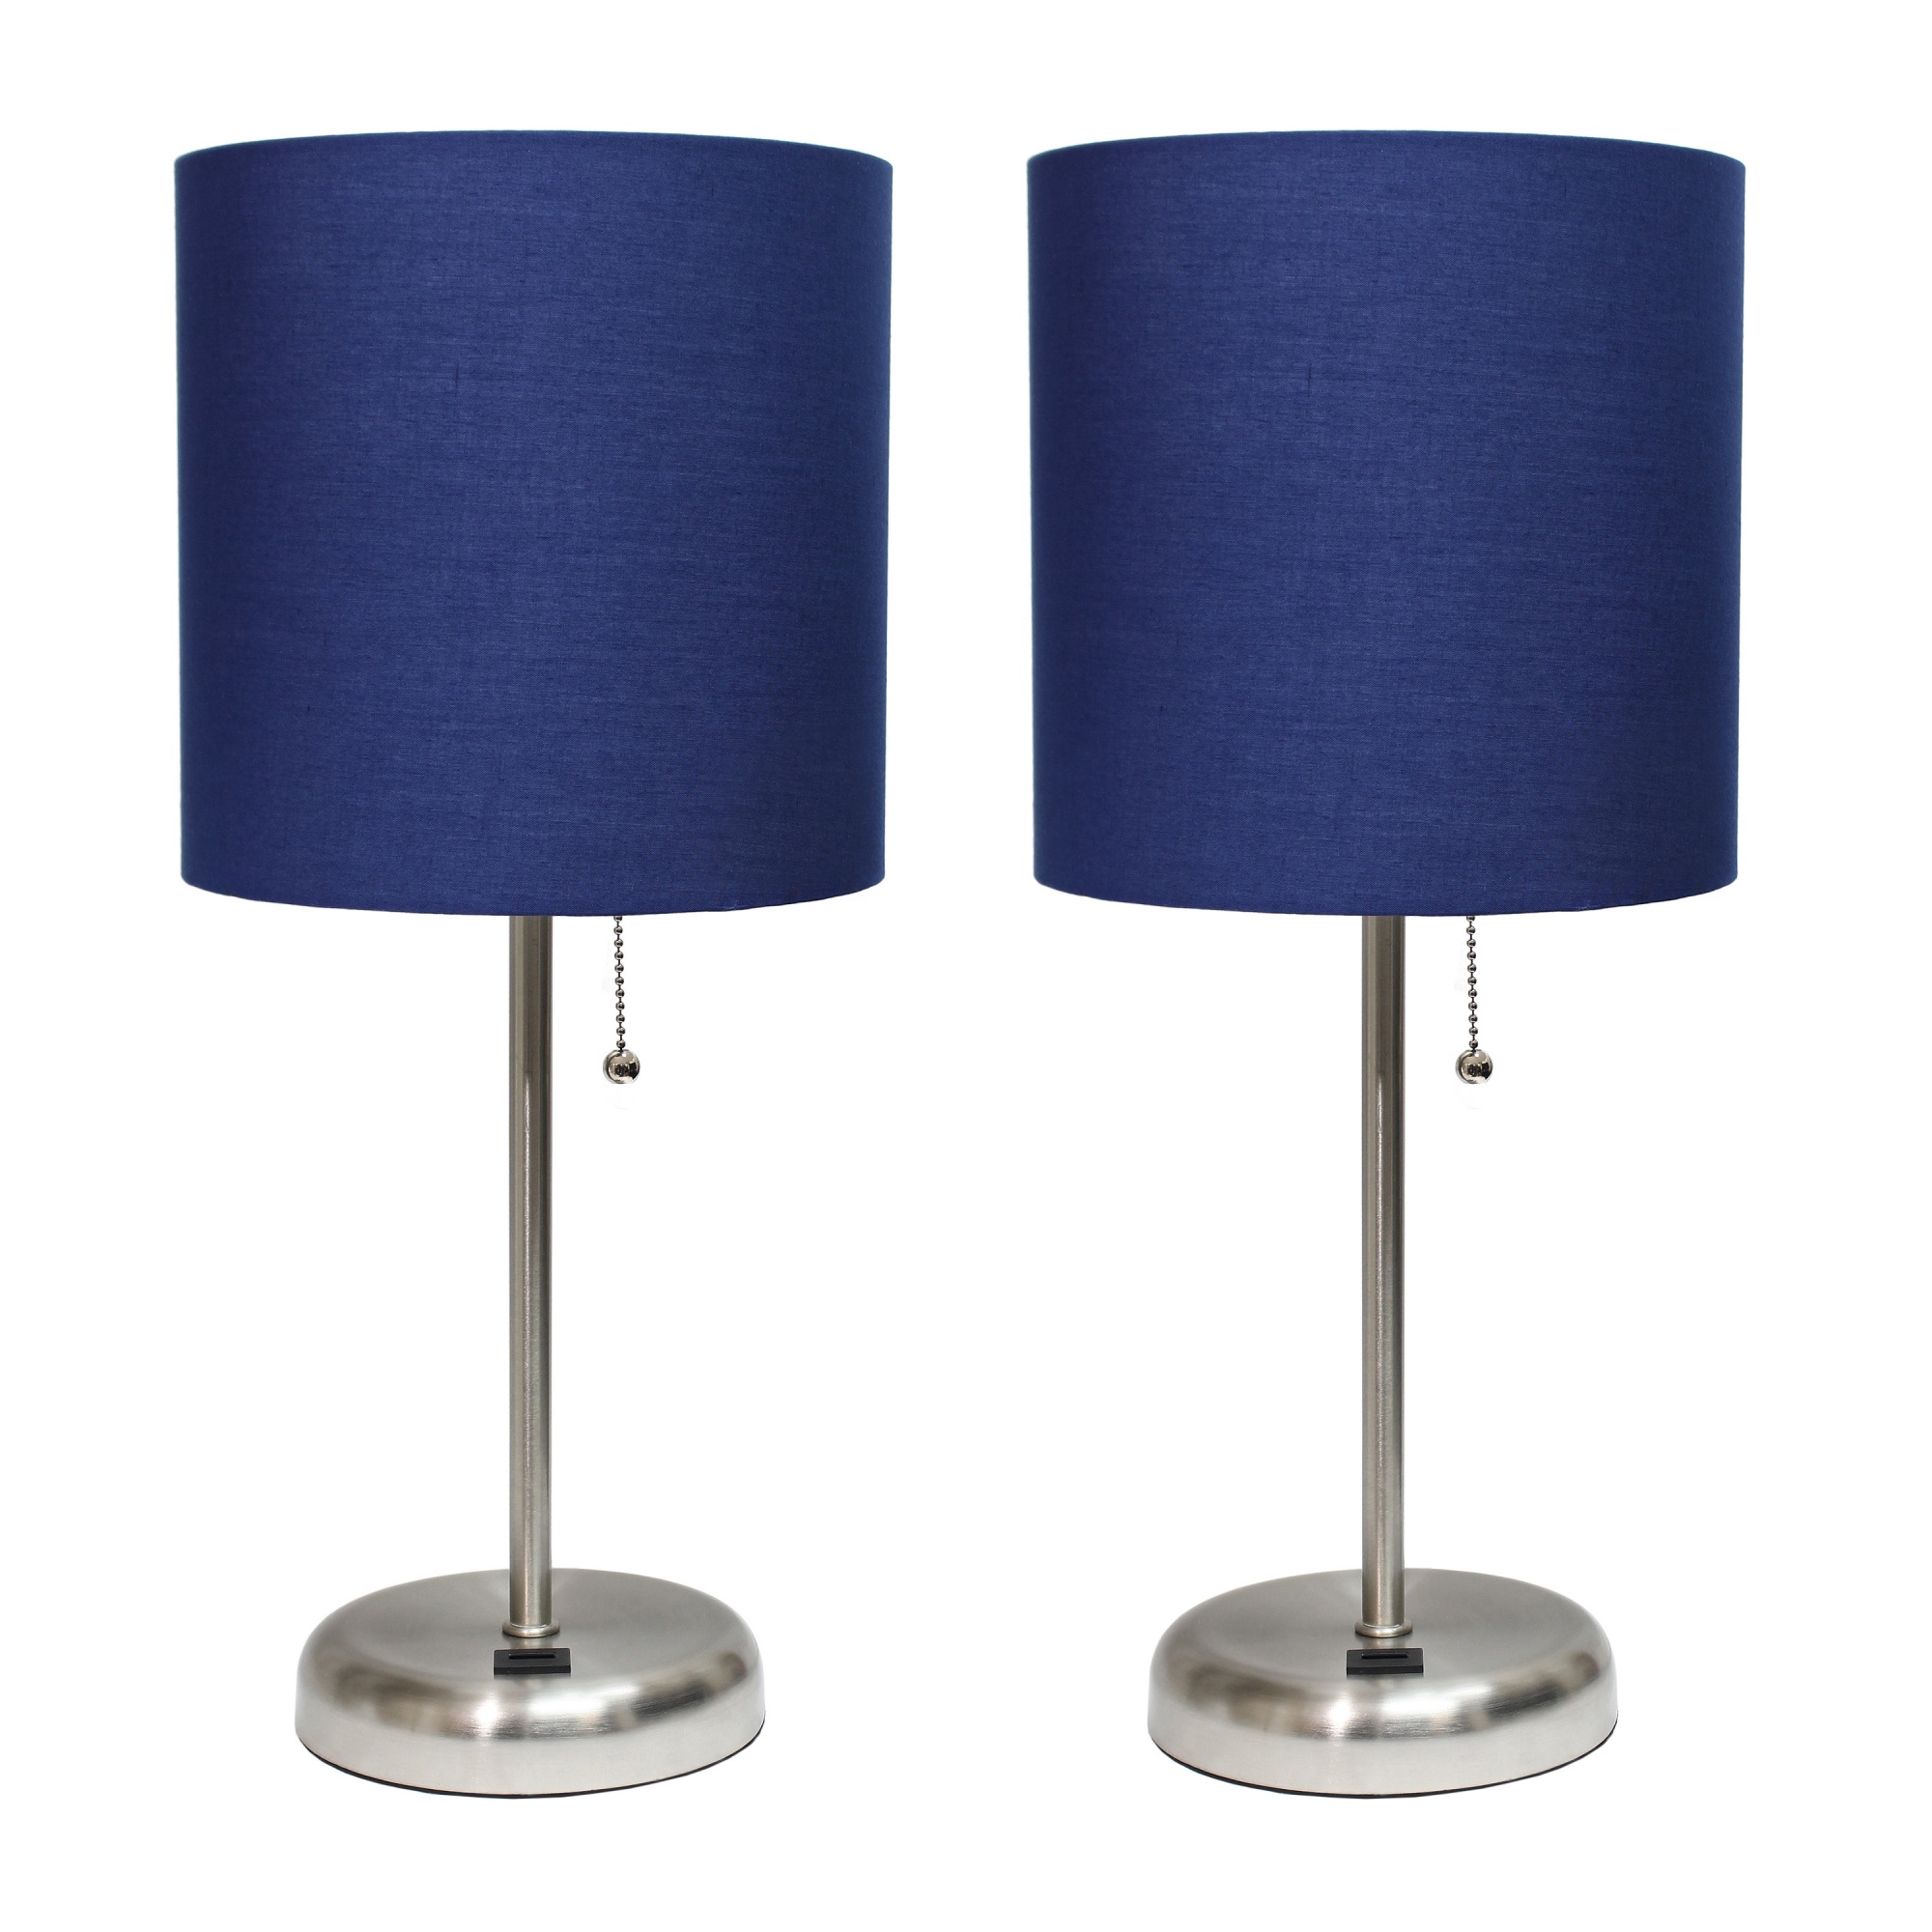 Limelights Stick Lamp with USB charging port and Fabric Shade 2 Pack Set, Navy